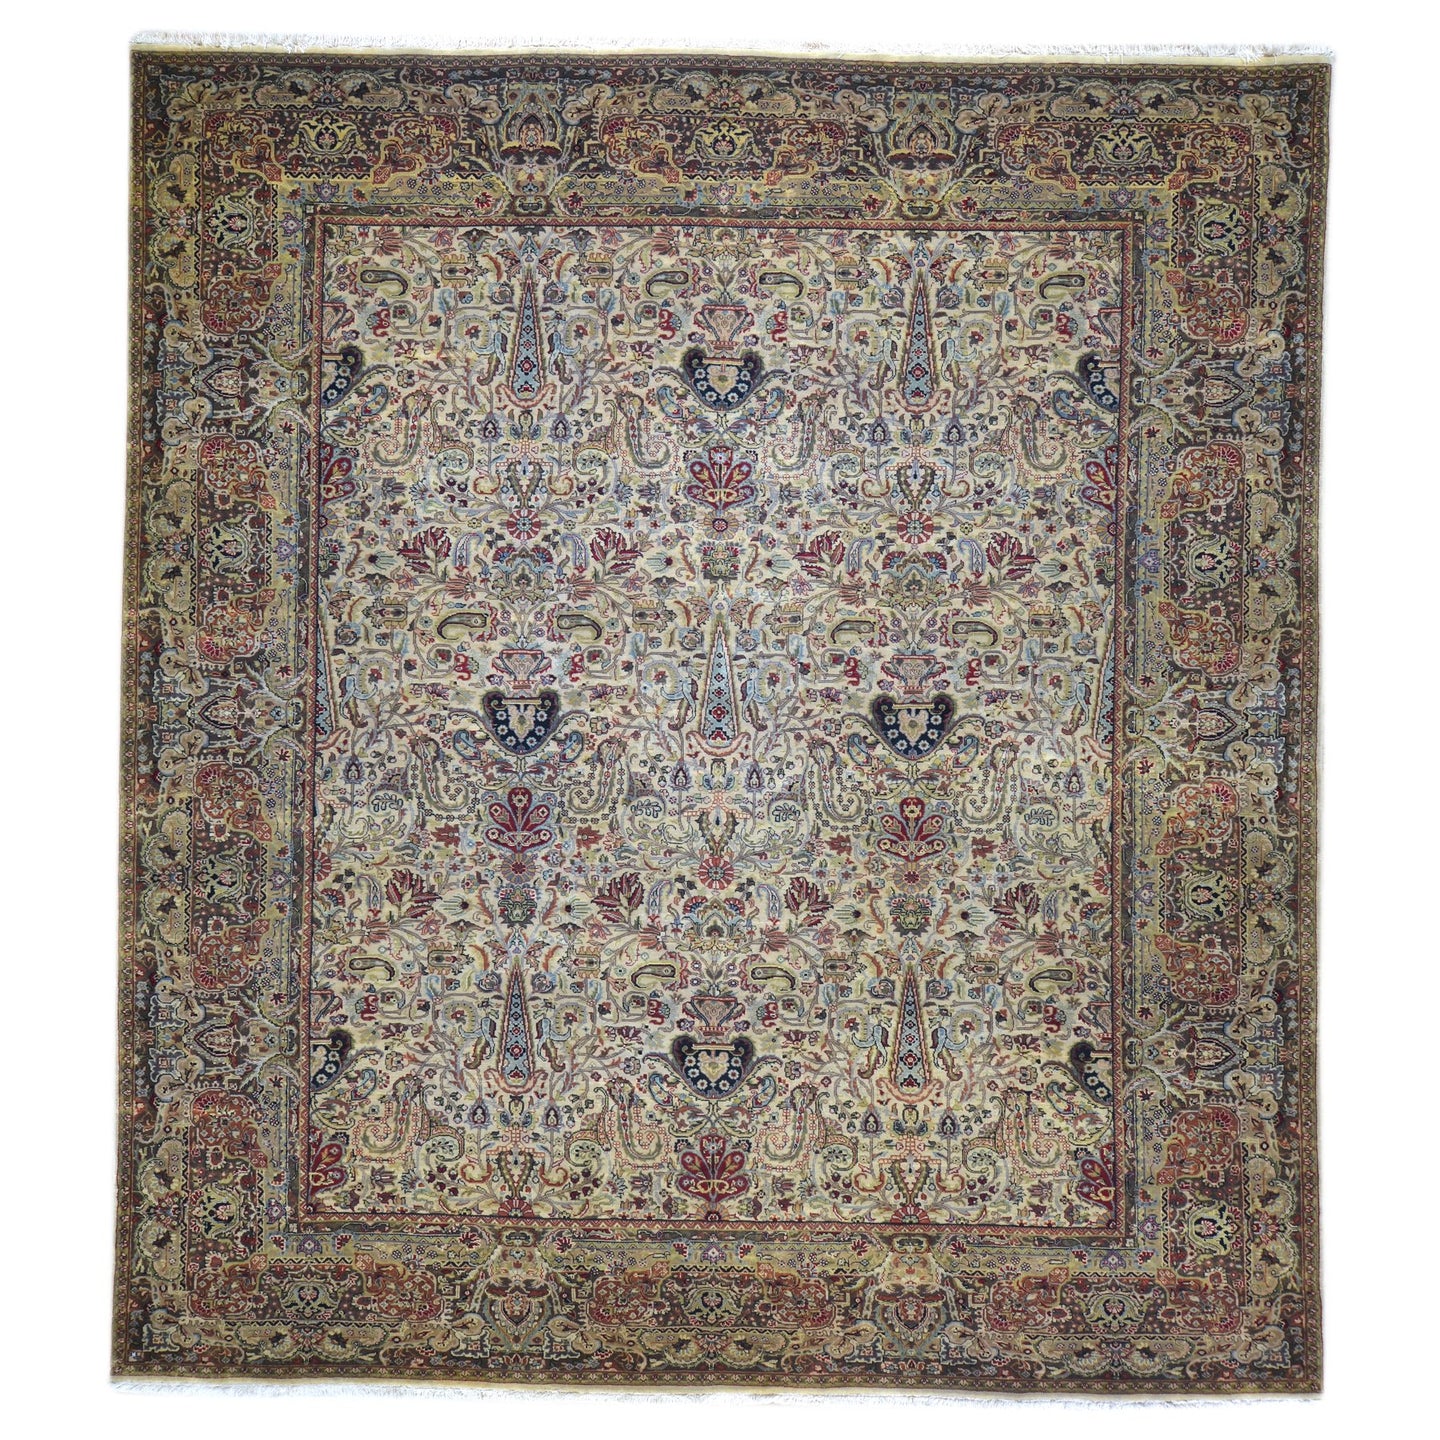 Oriental rugs, hand-knotted carpets, sustainable rugs, classic world oriental rugs, handmade, United States, interior design,  Brral-3660